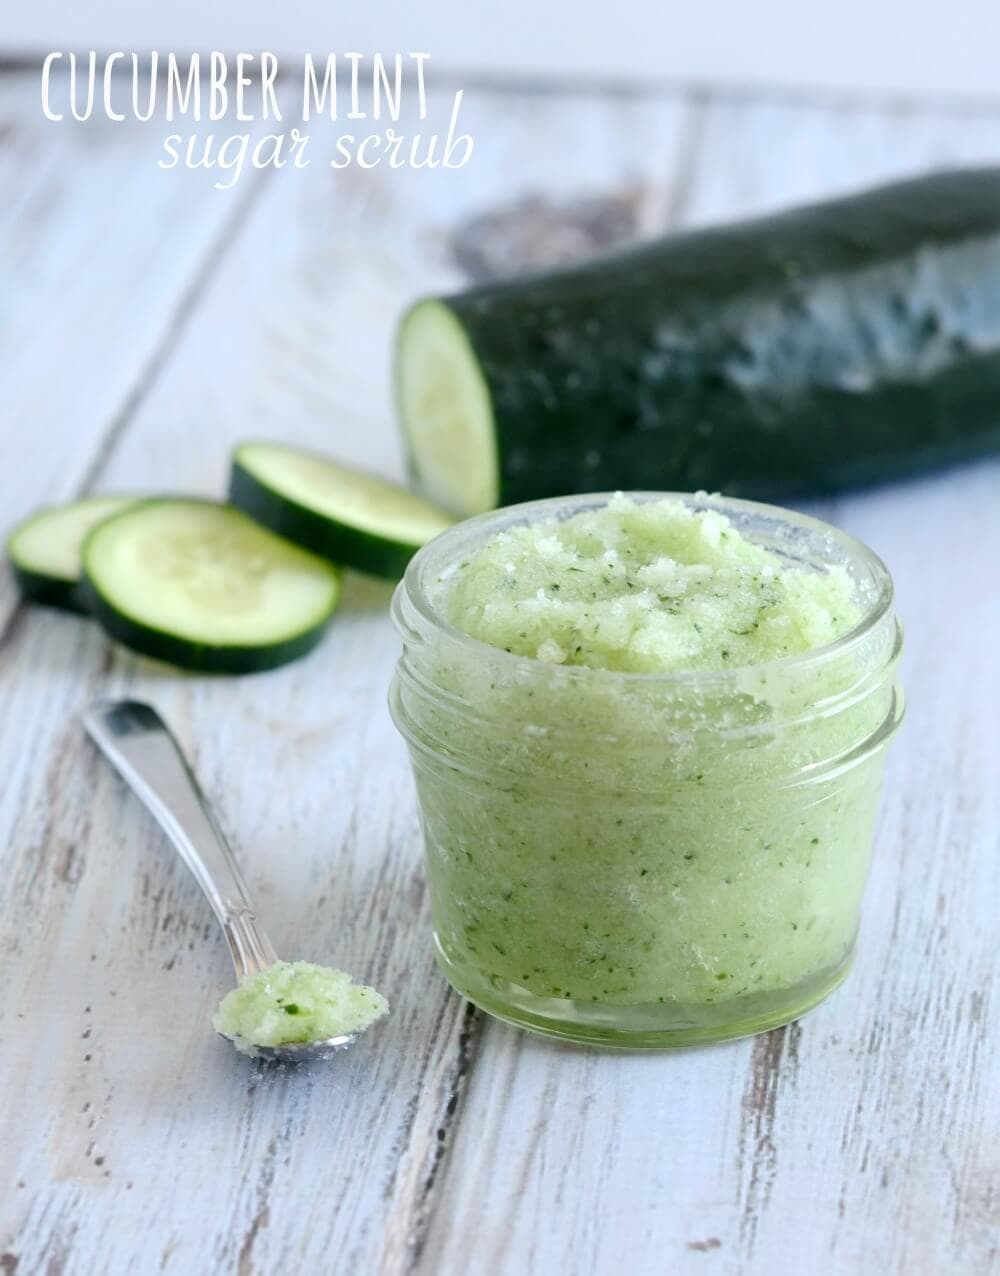 Cucumber Mint Sugar Scrub - So easy to make, and a great way to soften and revive dry, sluggish skin!